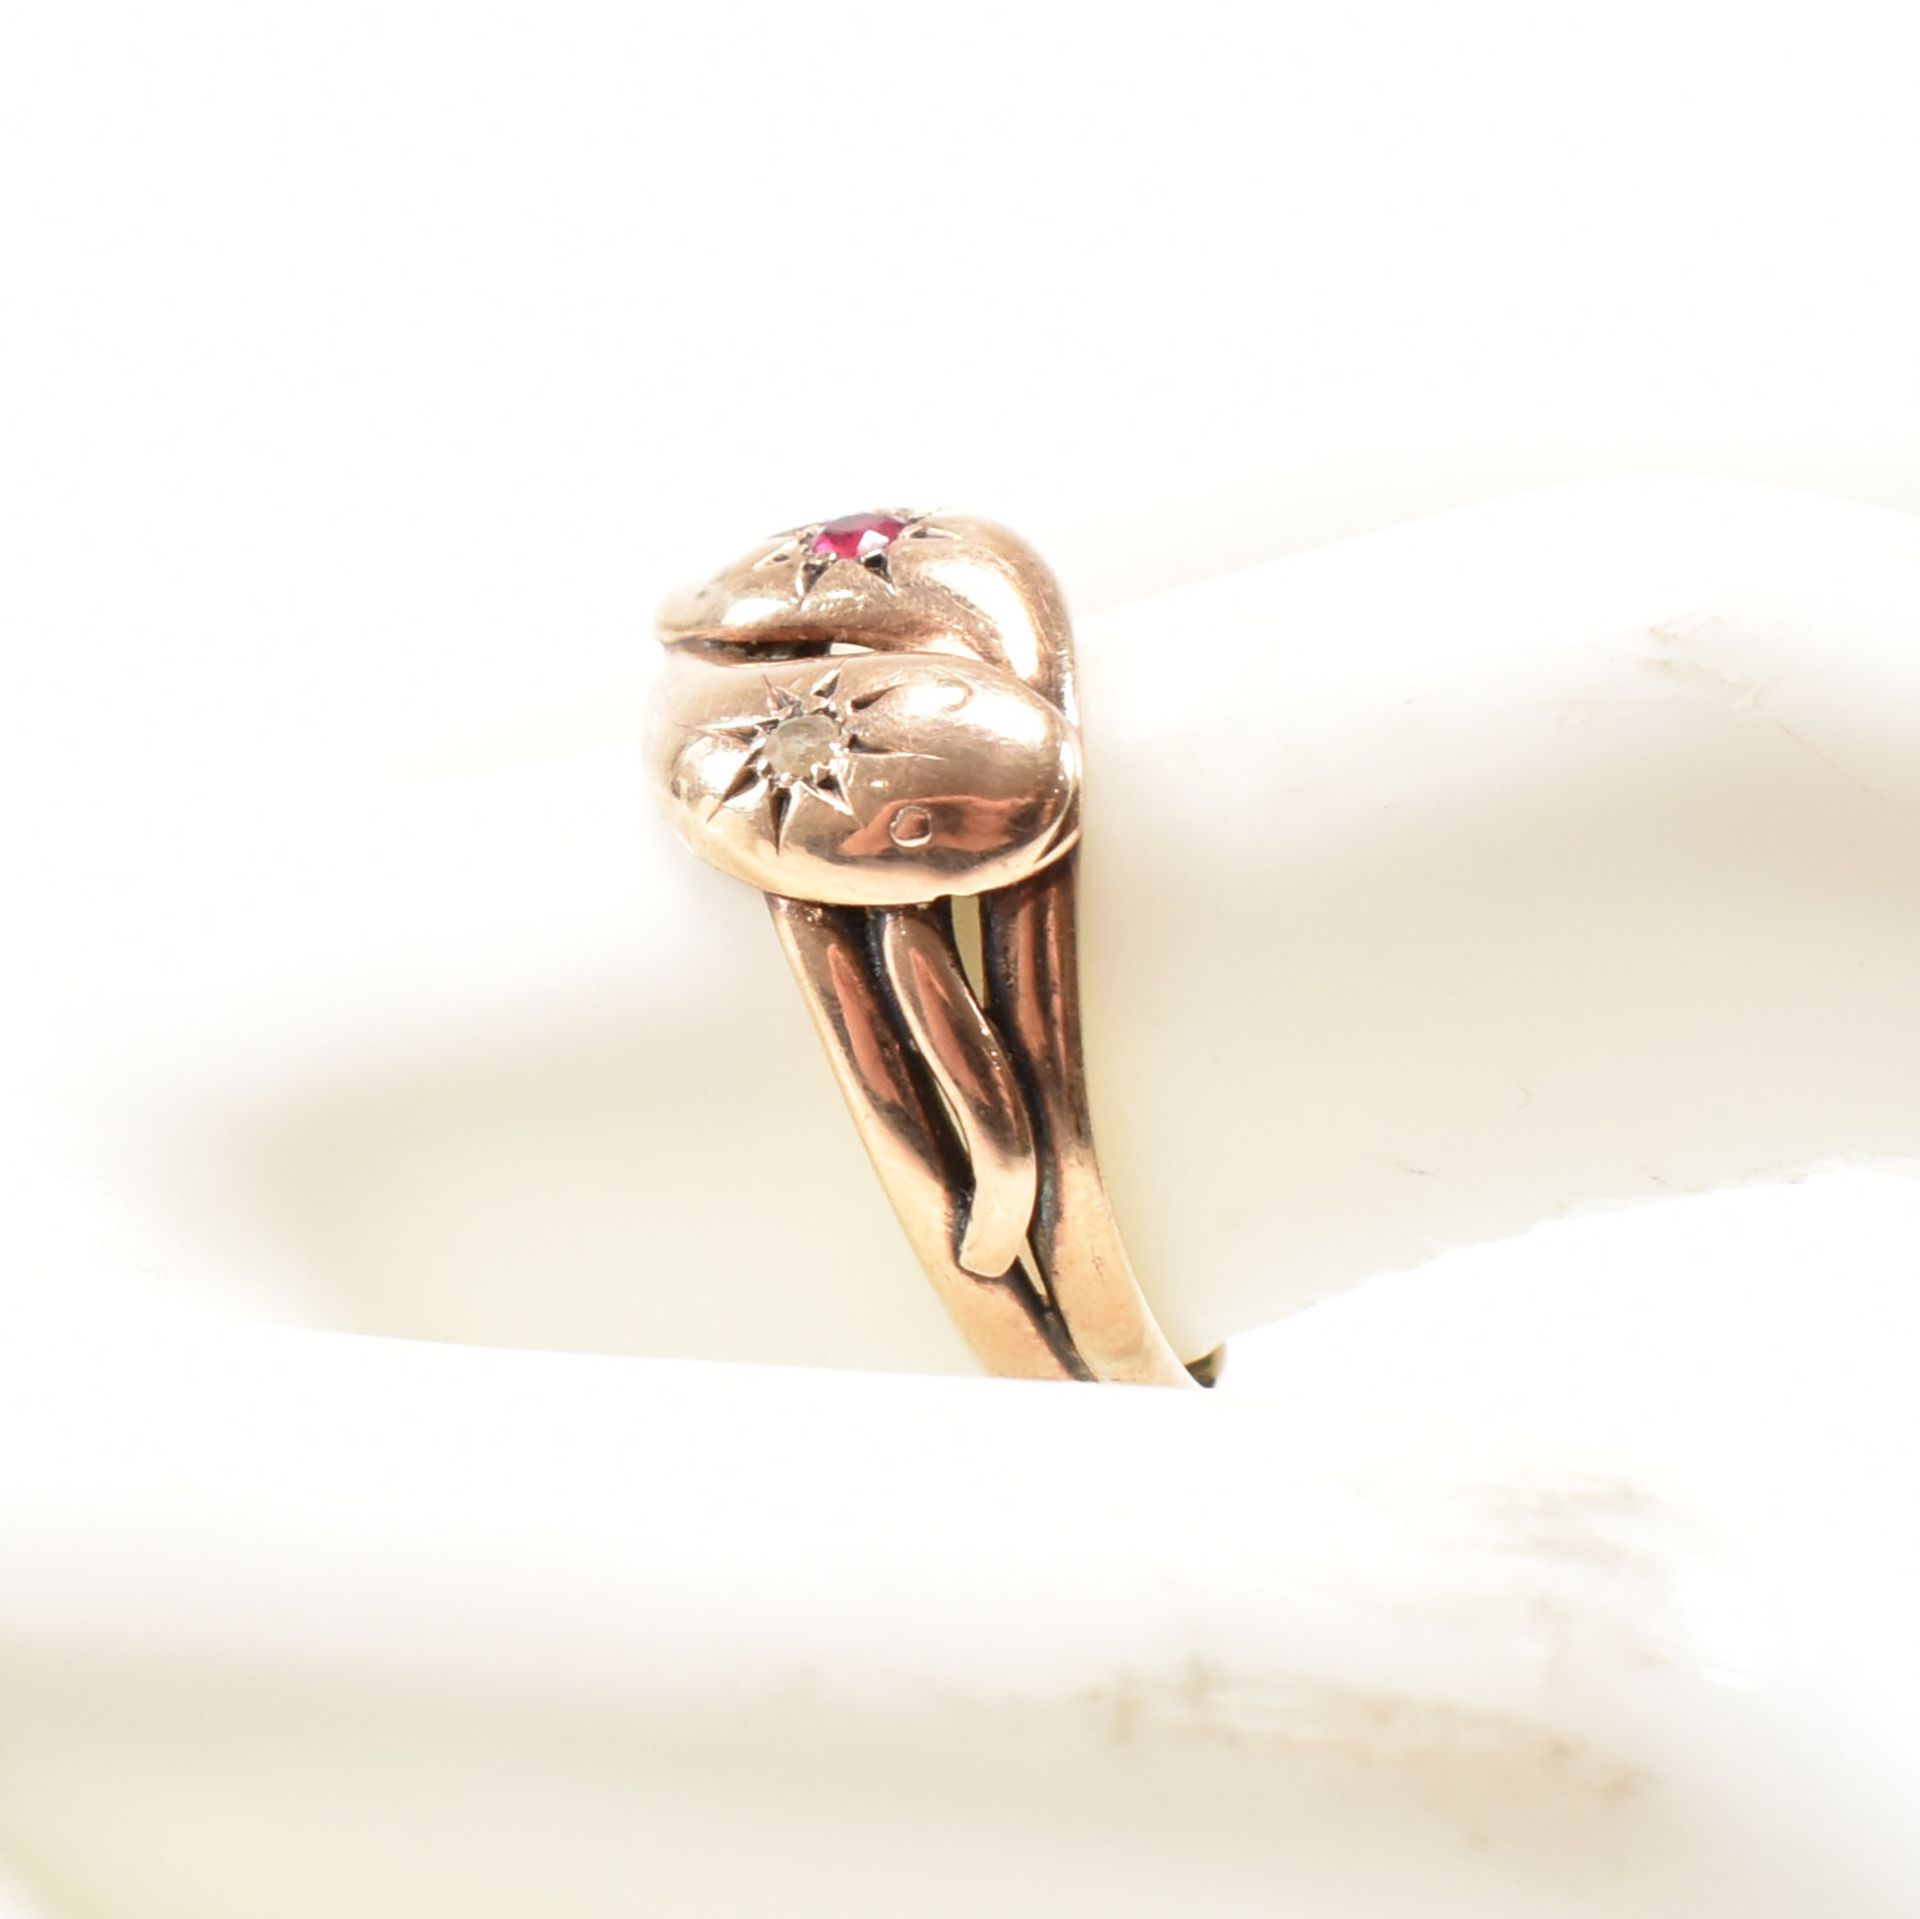 ANTIQUE HALLMARKED 9CT ROSE GOLD DIAMOND & RUBY TWIN SNAKE RING - Image 7 of 7